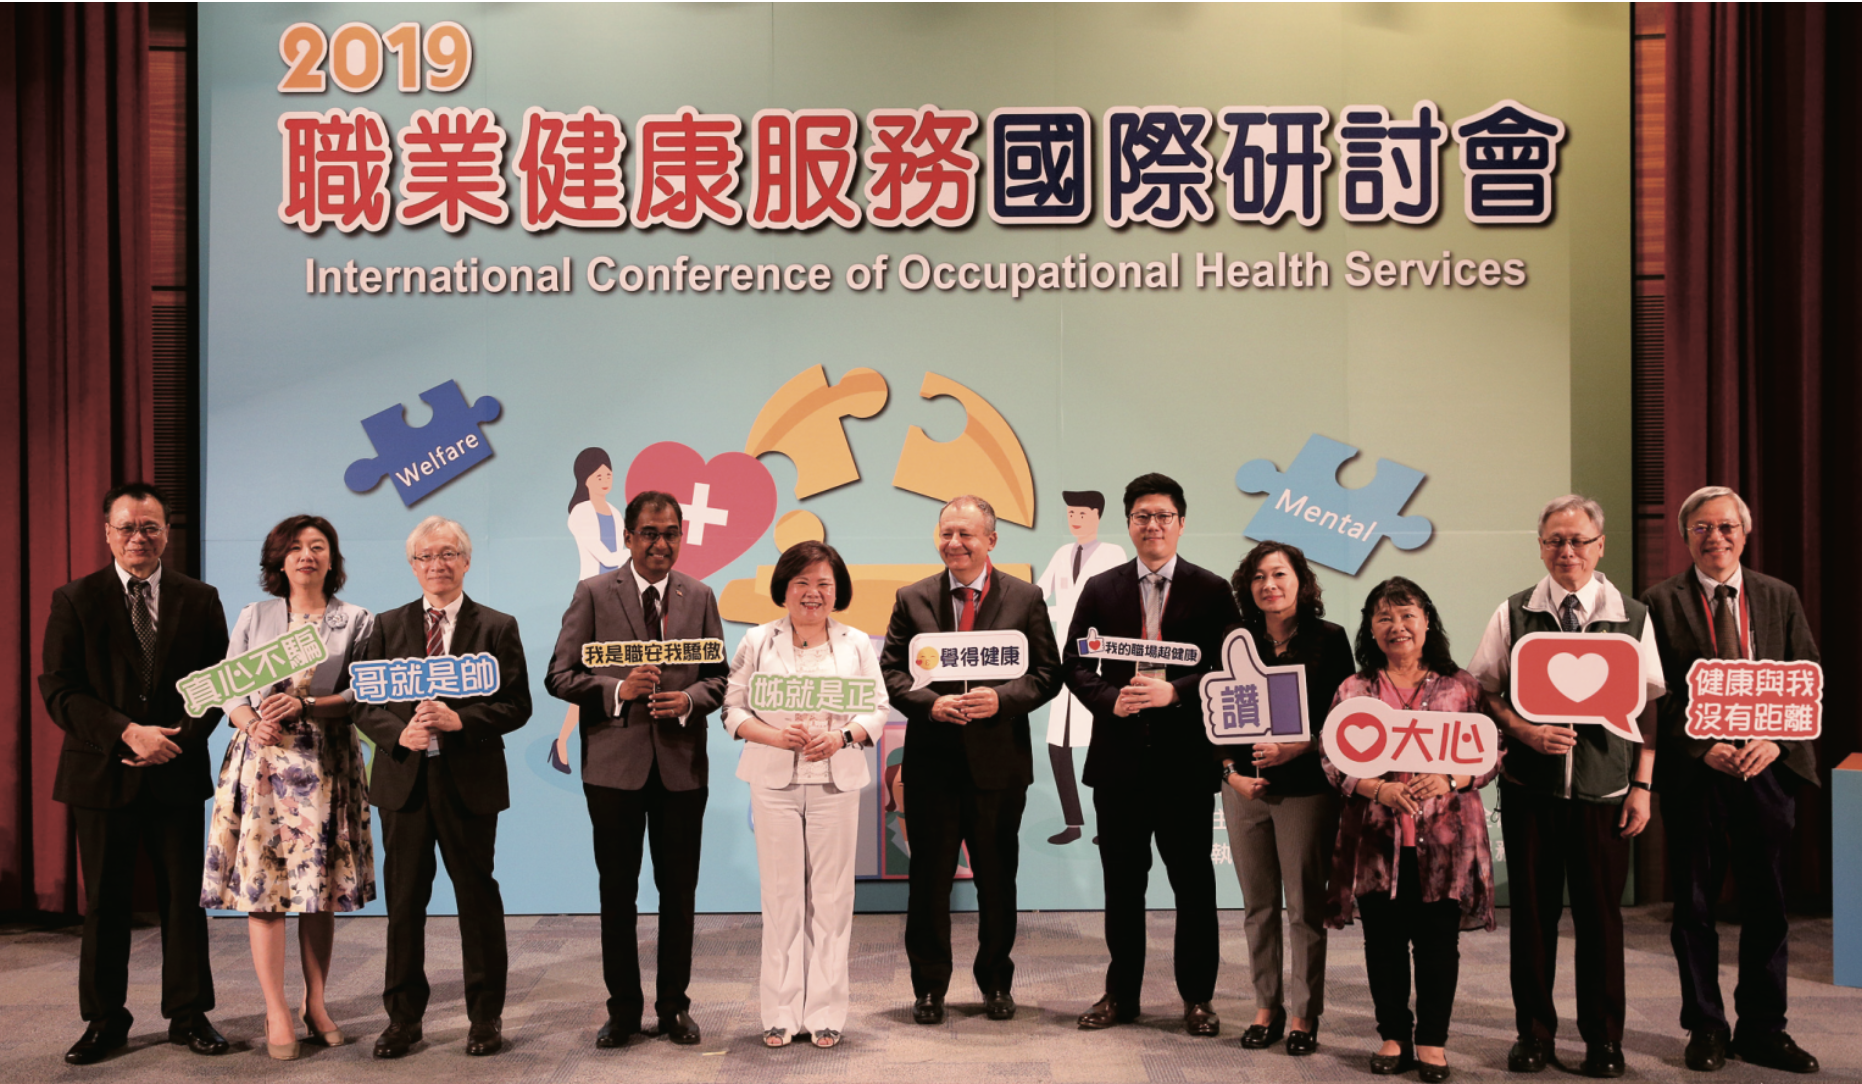 Labor Minister Hsu Ming-Chun attends 2019 International Conference of OHS and calls on enterprises to establish ‘people-centered’ core values